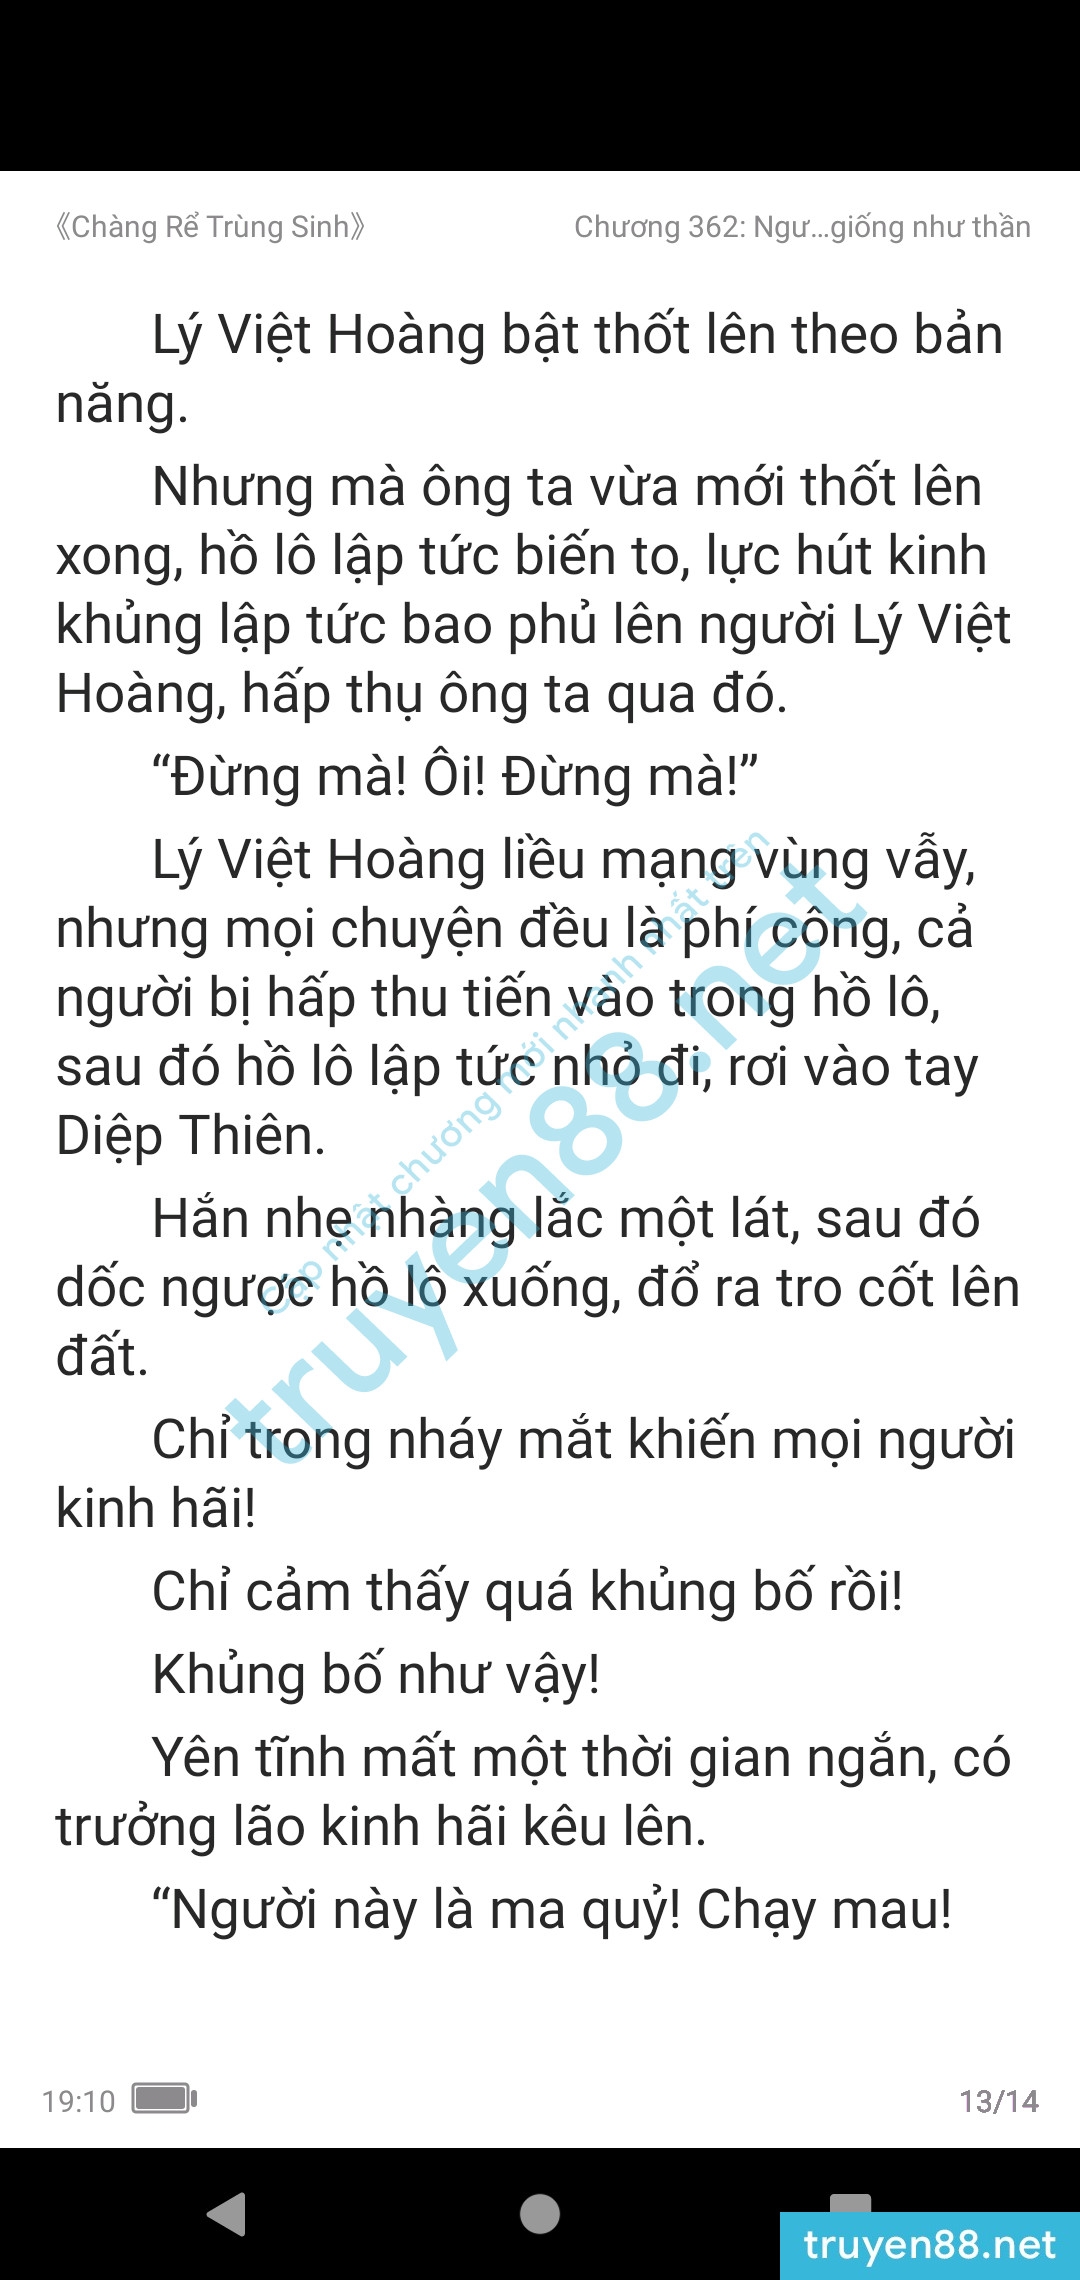 chang-re-trung-sinh-362-1